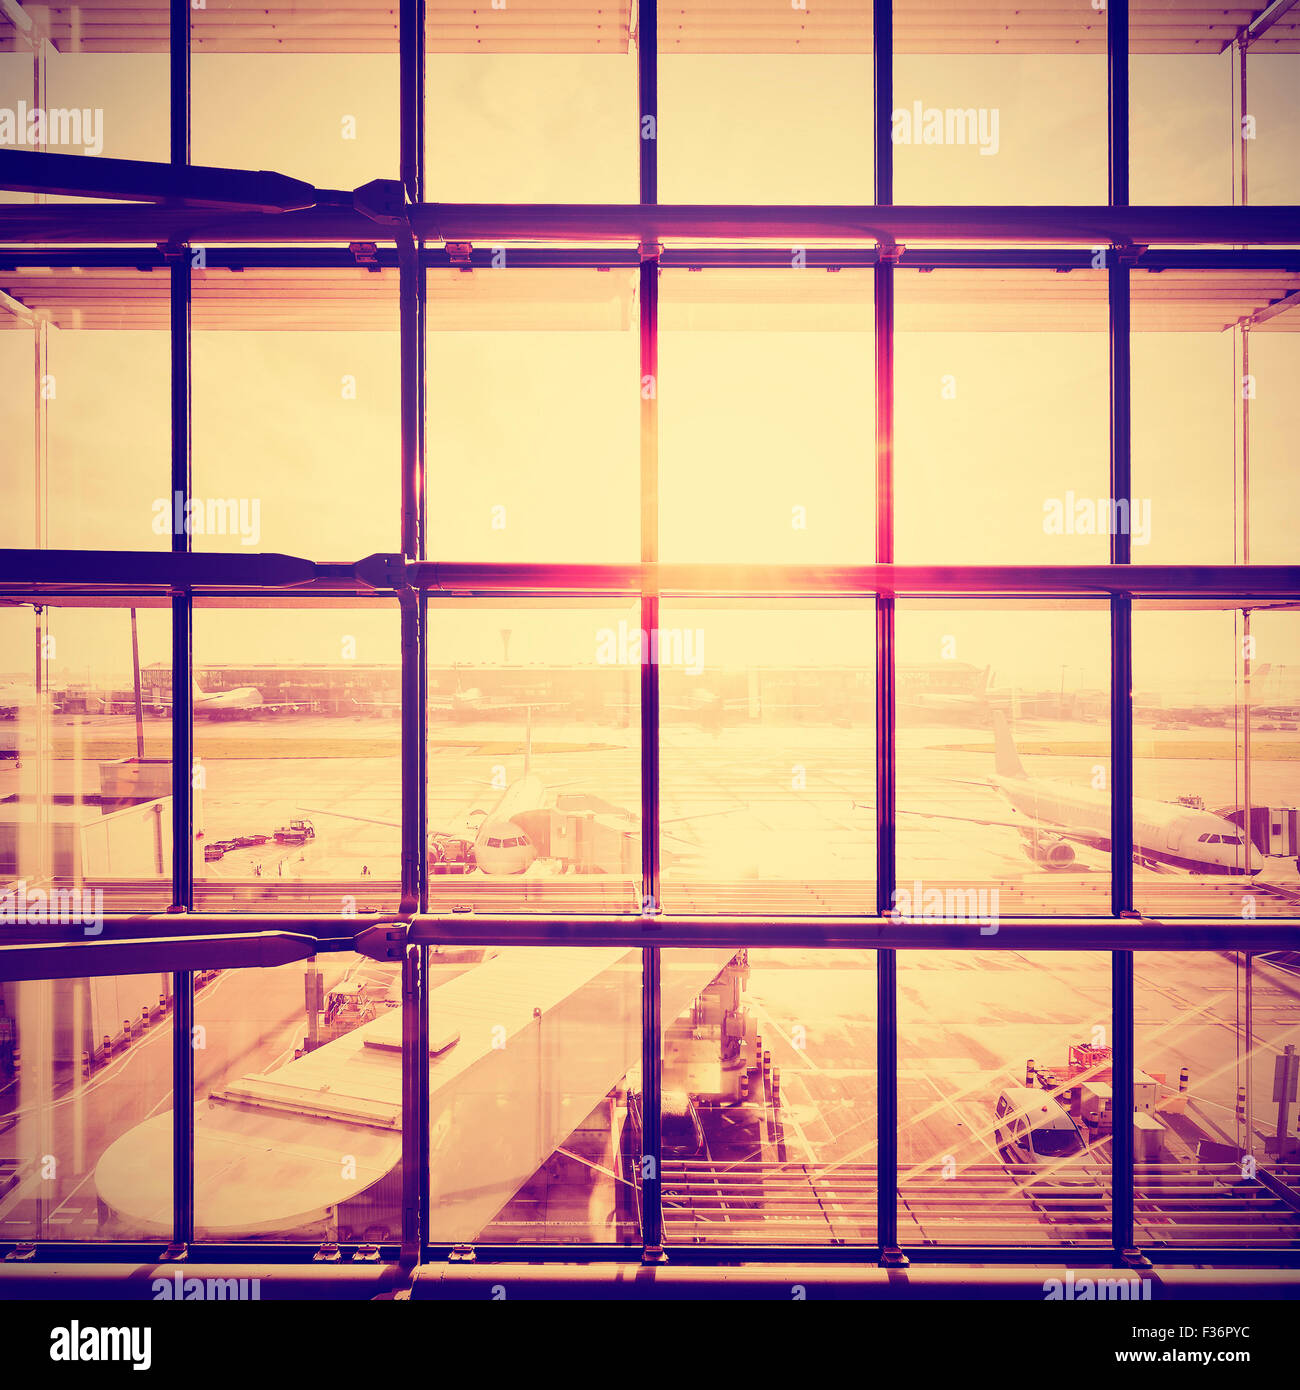 Instagram stylized picture of an airport, transportation and business travel concept. Stock Photo